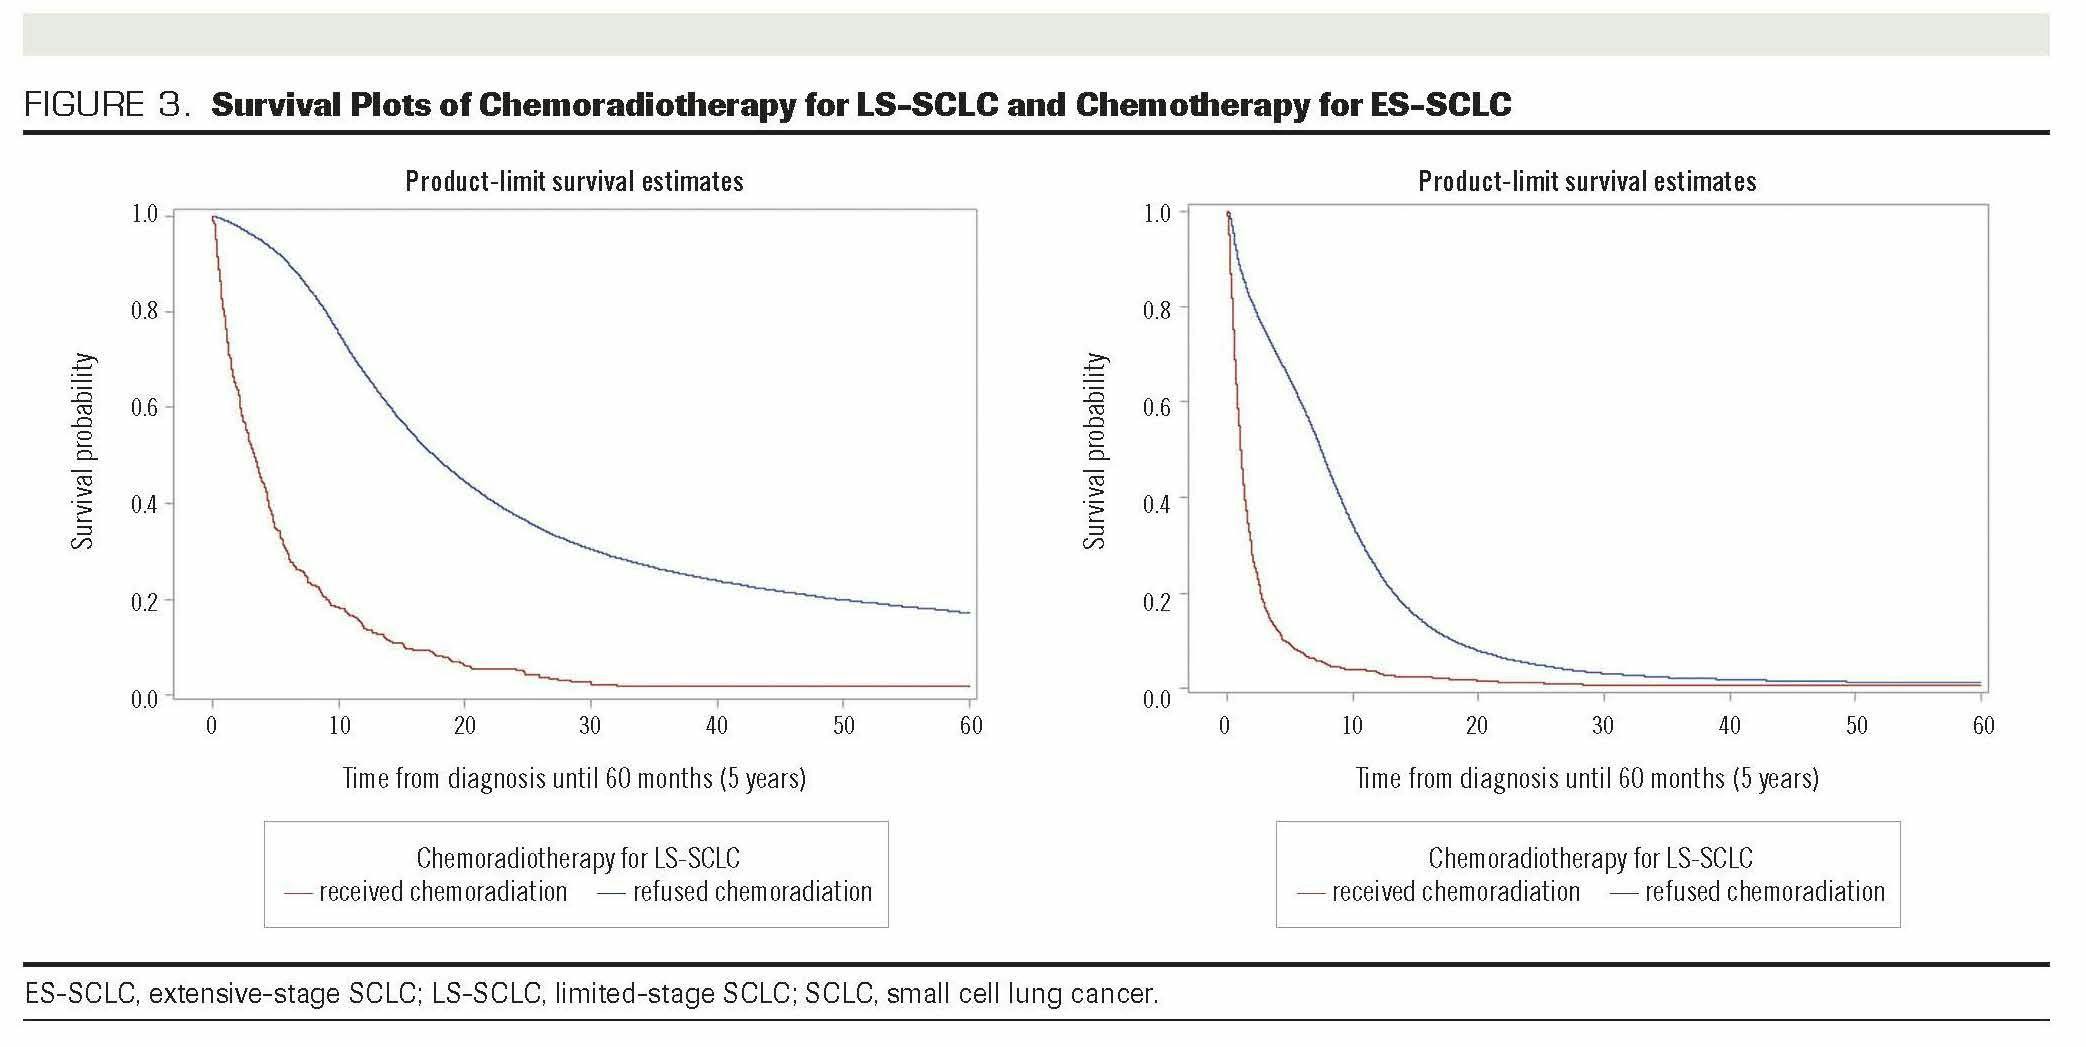 FIGURE 3. Survival Plots of Chemoradiotherapy for LS-SCLC and Chemotherapy for ES-SCLC